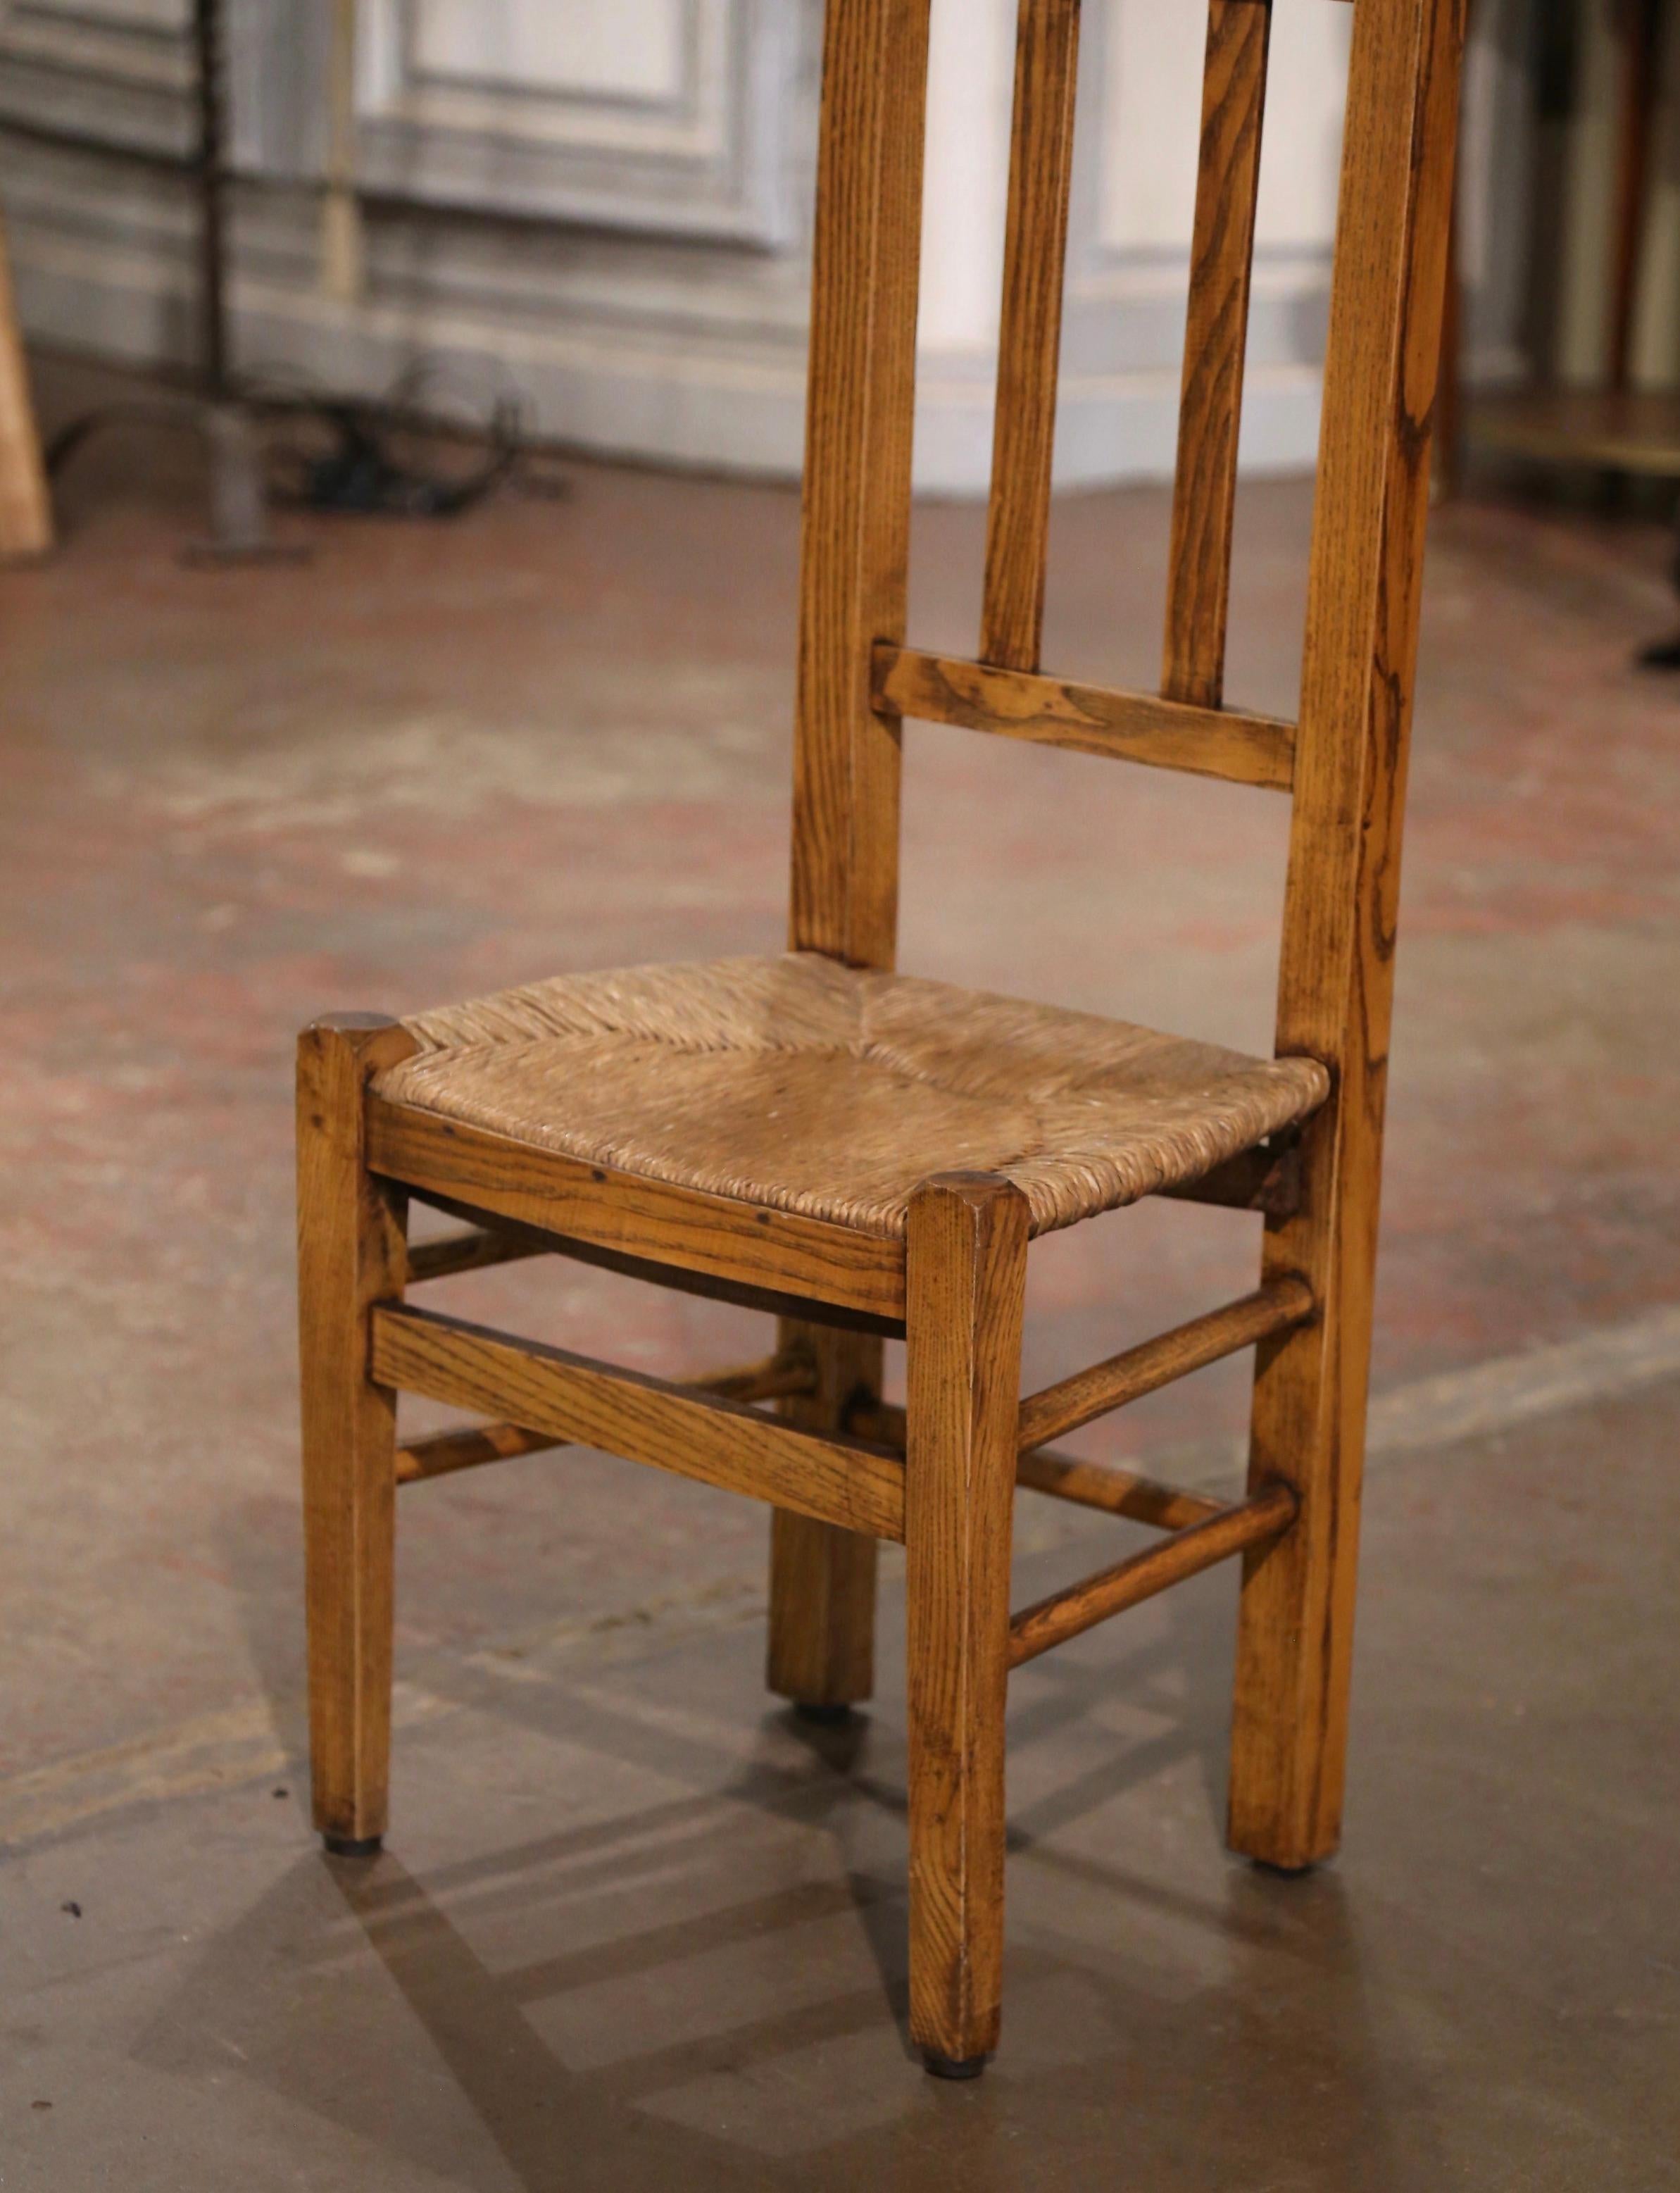 Place this elegant antique prayer chair in a bedroom for your daily devotions. Created in Normandy, France circa 1880, the Prie-Dieu ( Pray God ), stands on curved legs joined by a double turned stretcher over a hand woven rush seat. The tall back